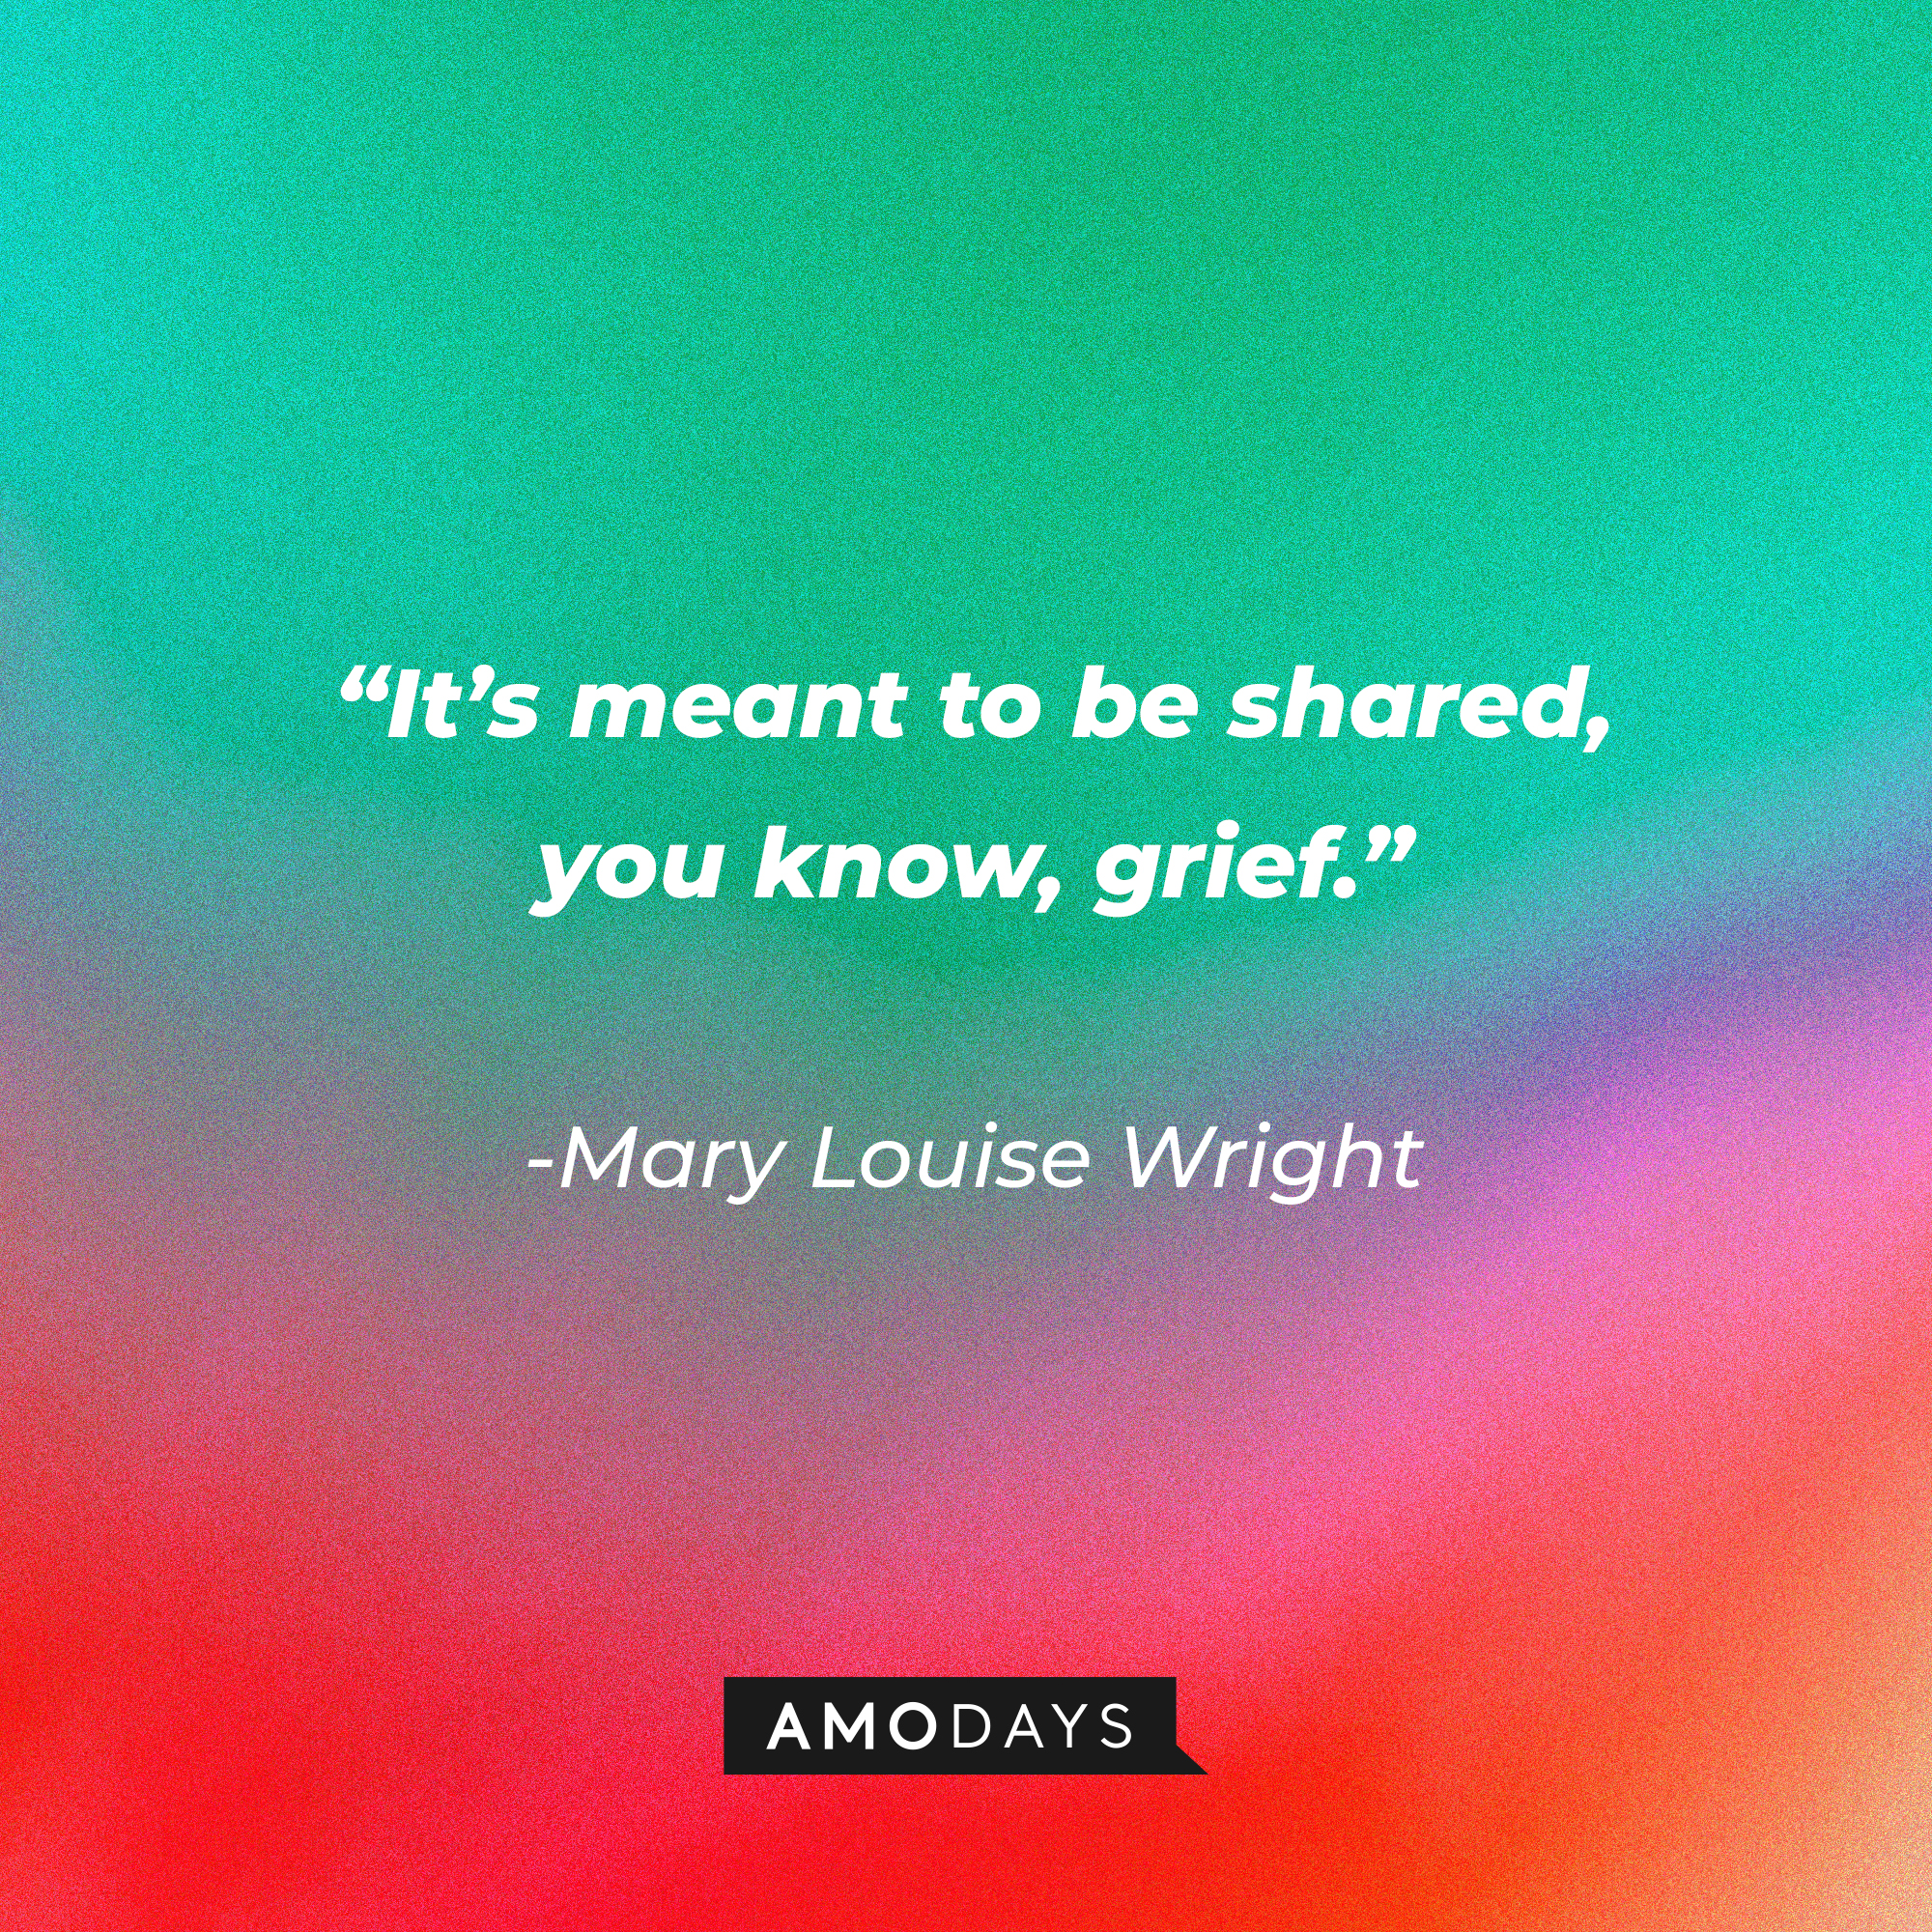 Mary Louise Wright’s quote: “It’s meant to be shared, you know, grief.” │Source: AmoDays